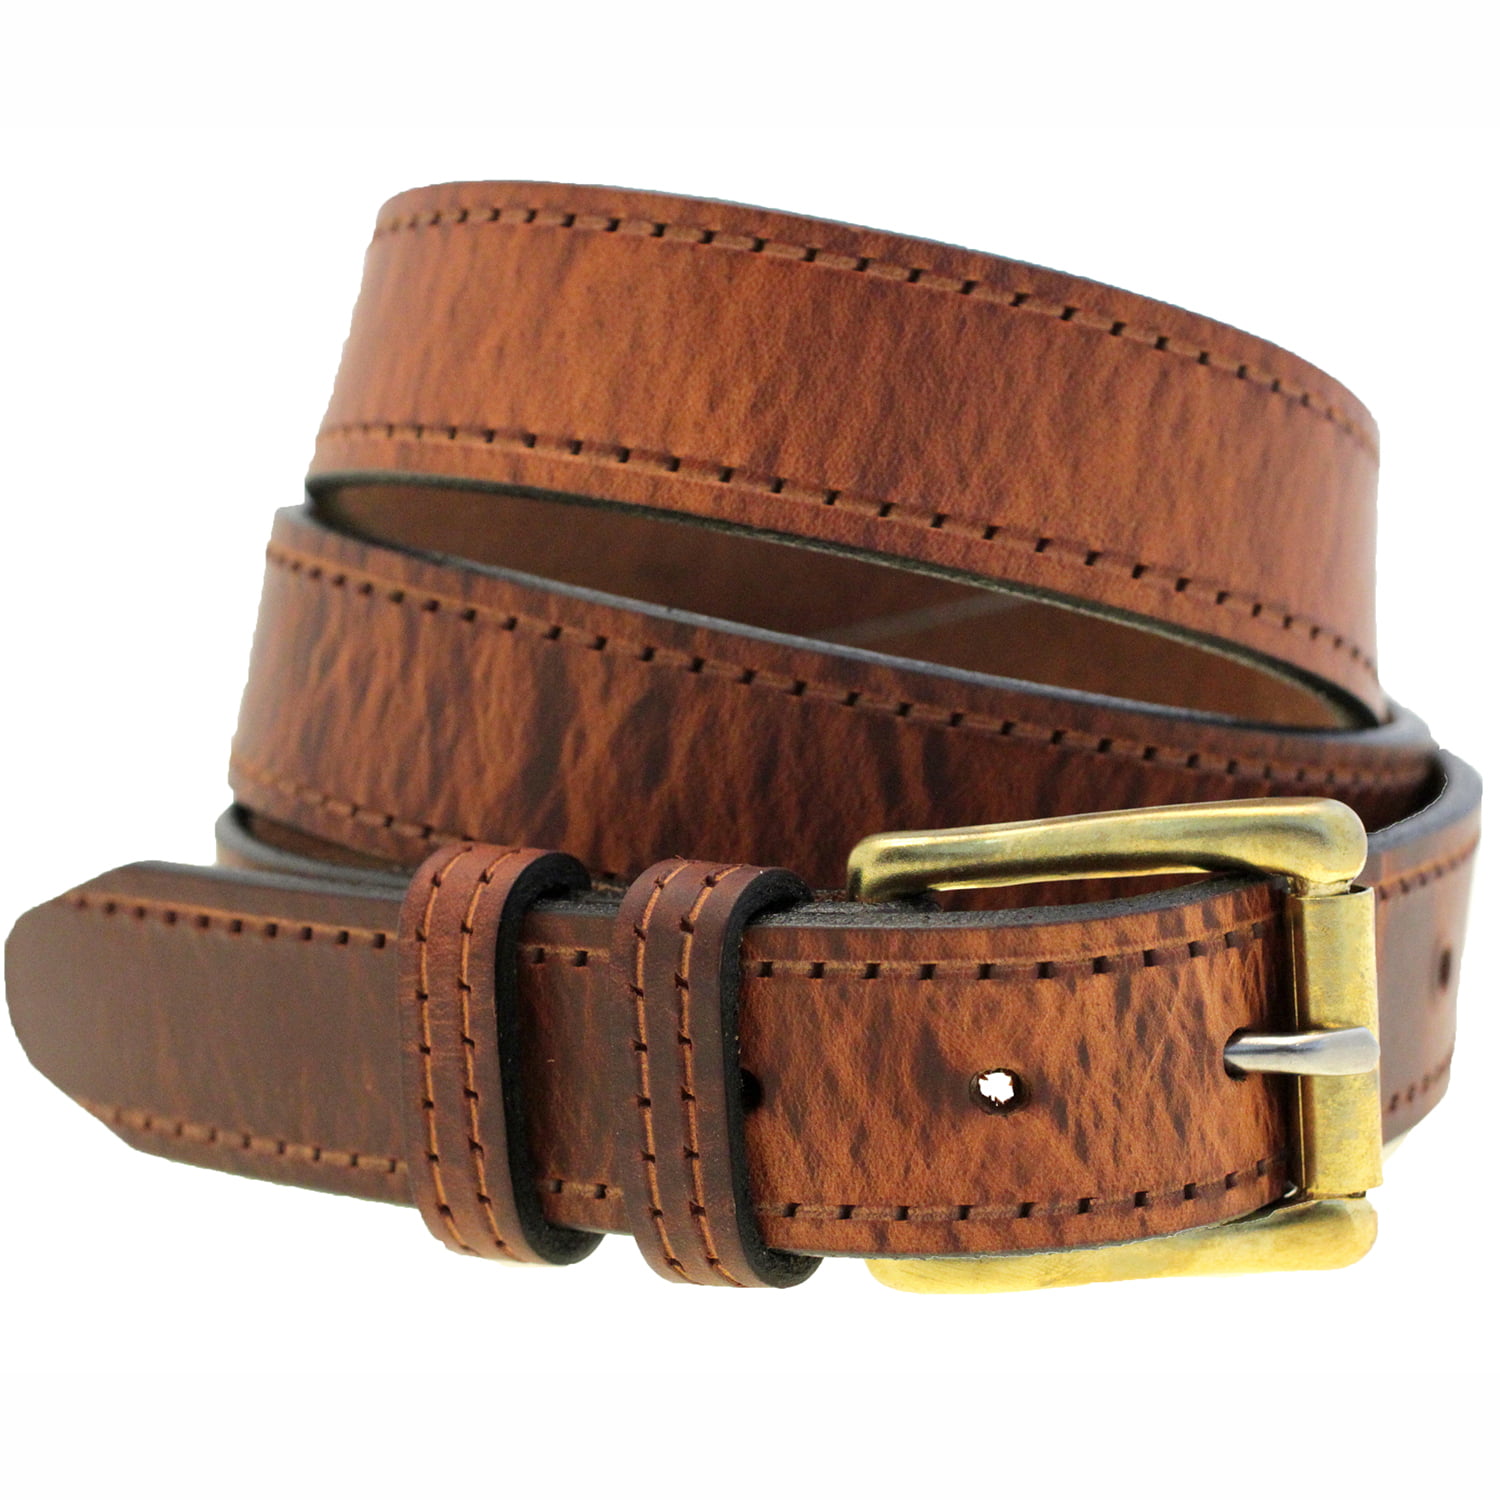 Mens 1 1/4 Rustic Hot Dipped Tan Harness Leather Belt Faux-Stitching ...